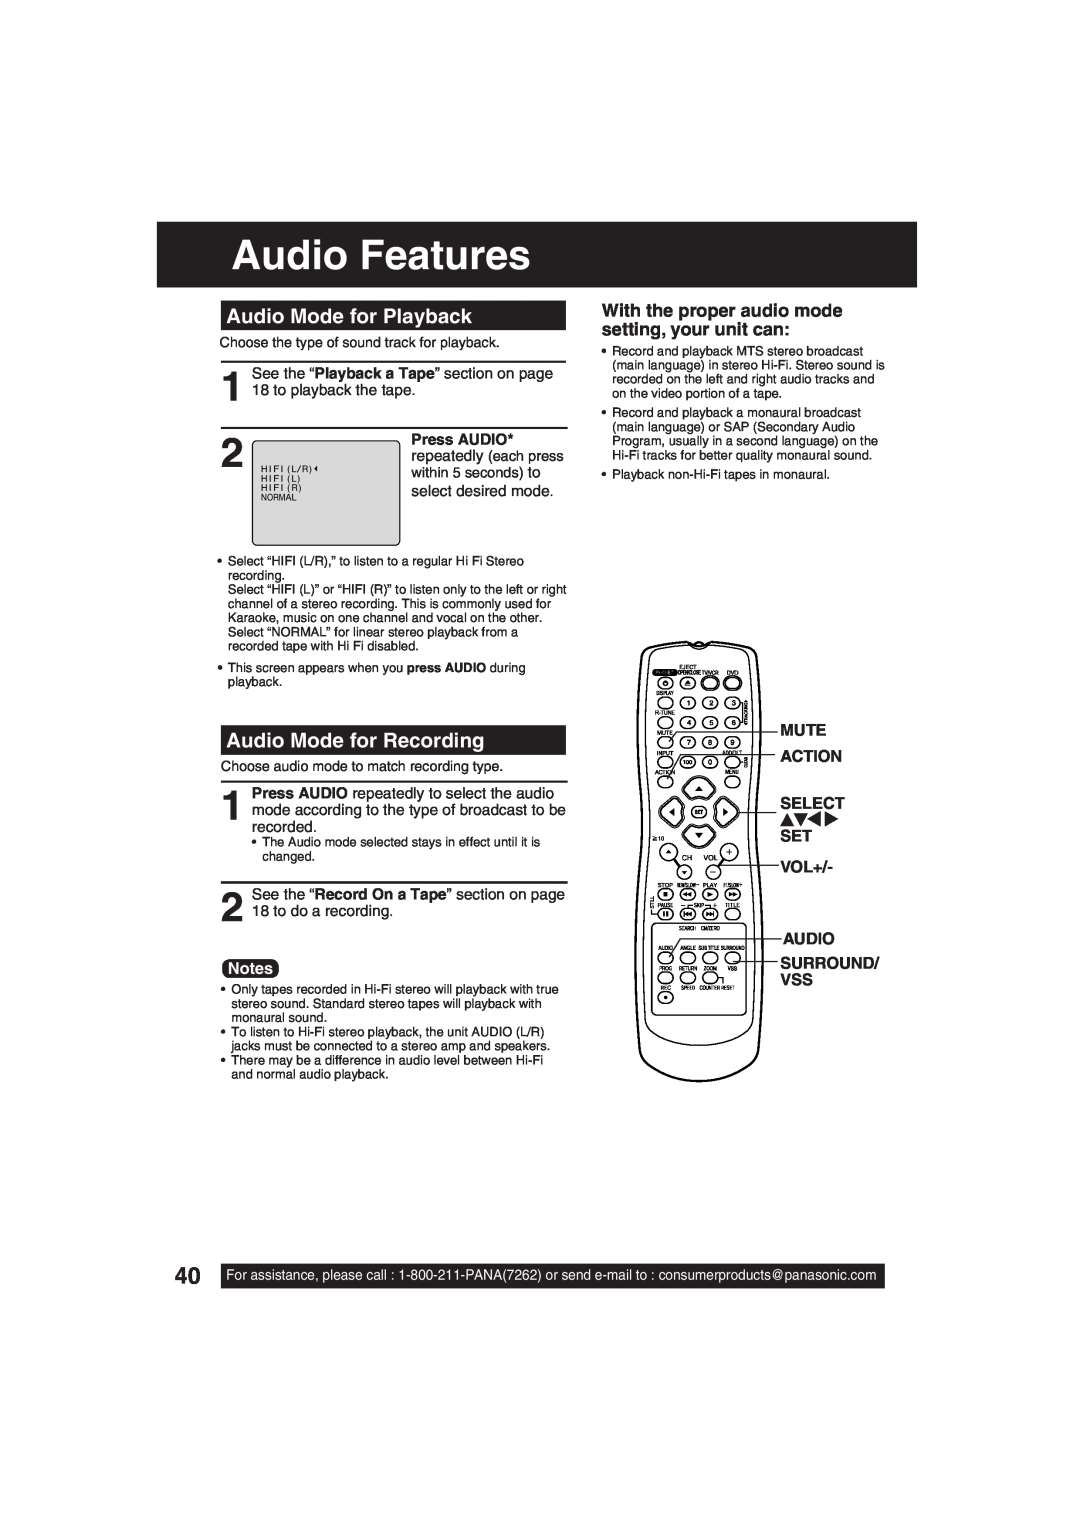 Panasonic PV-DF203, PV-DF273 manual Audio Features, Audio Mode for Playback, Audio Mode for Recording, Press AUDIO 